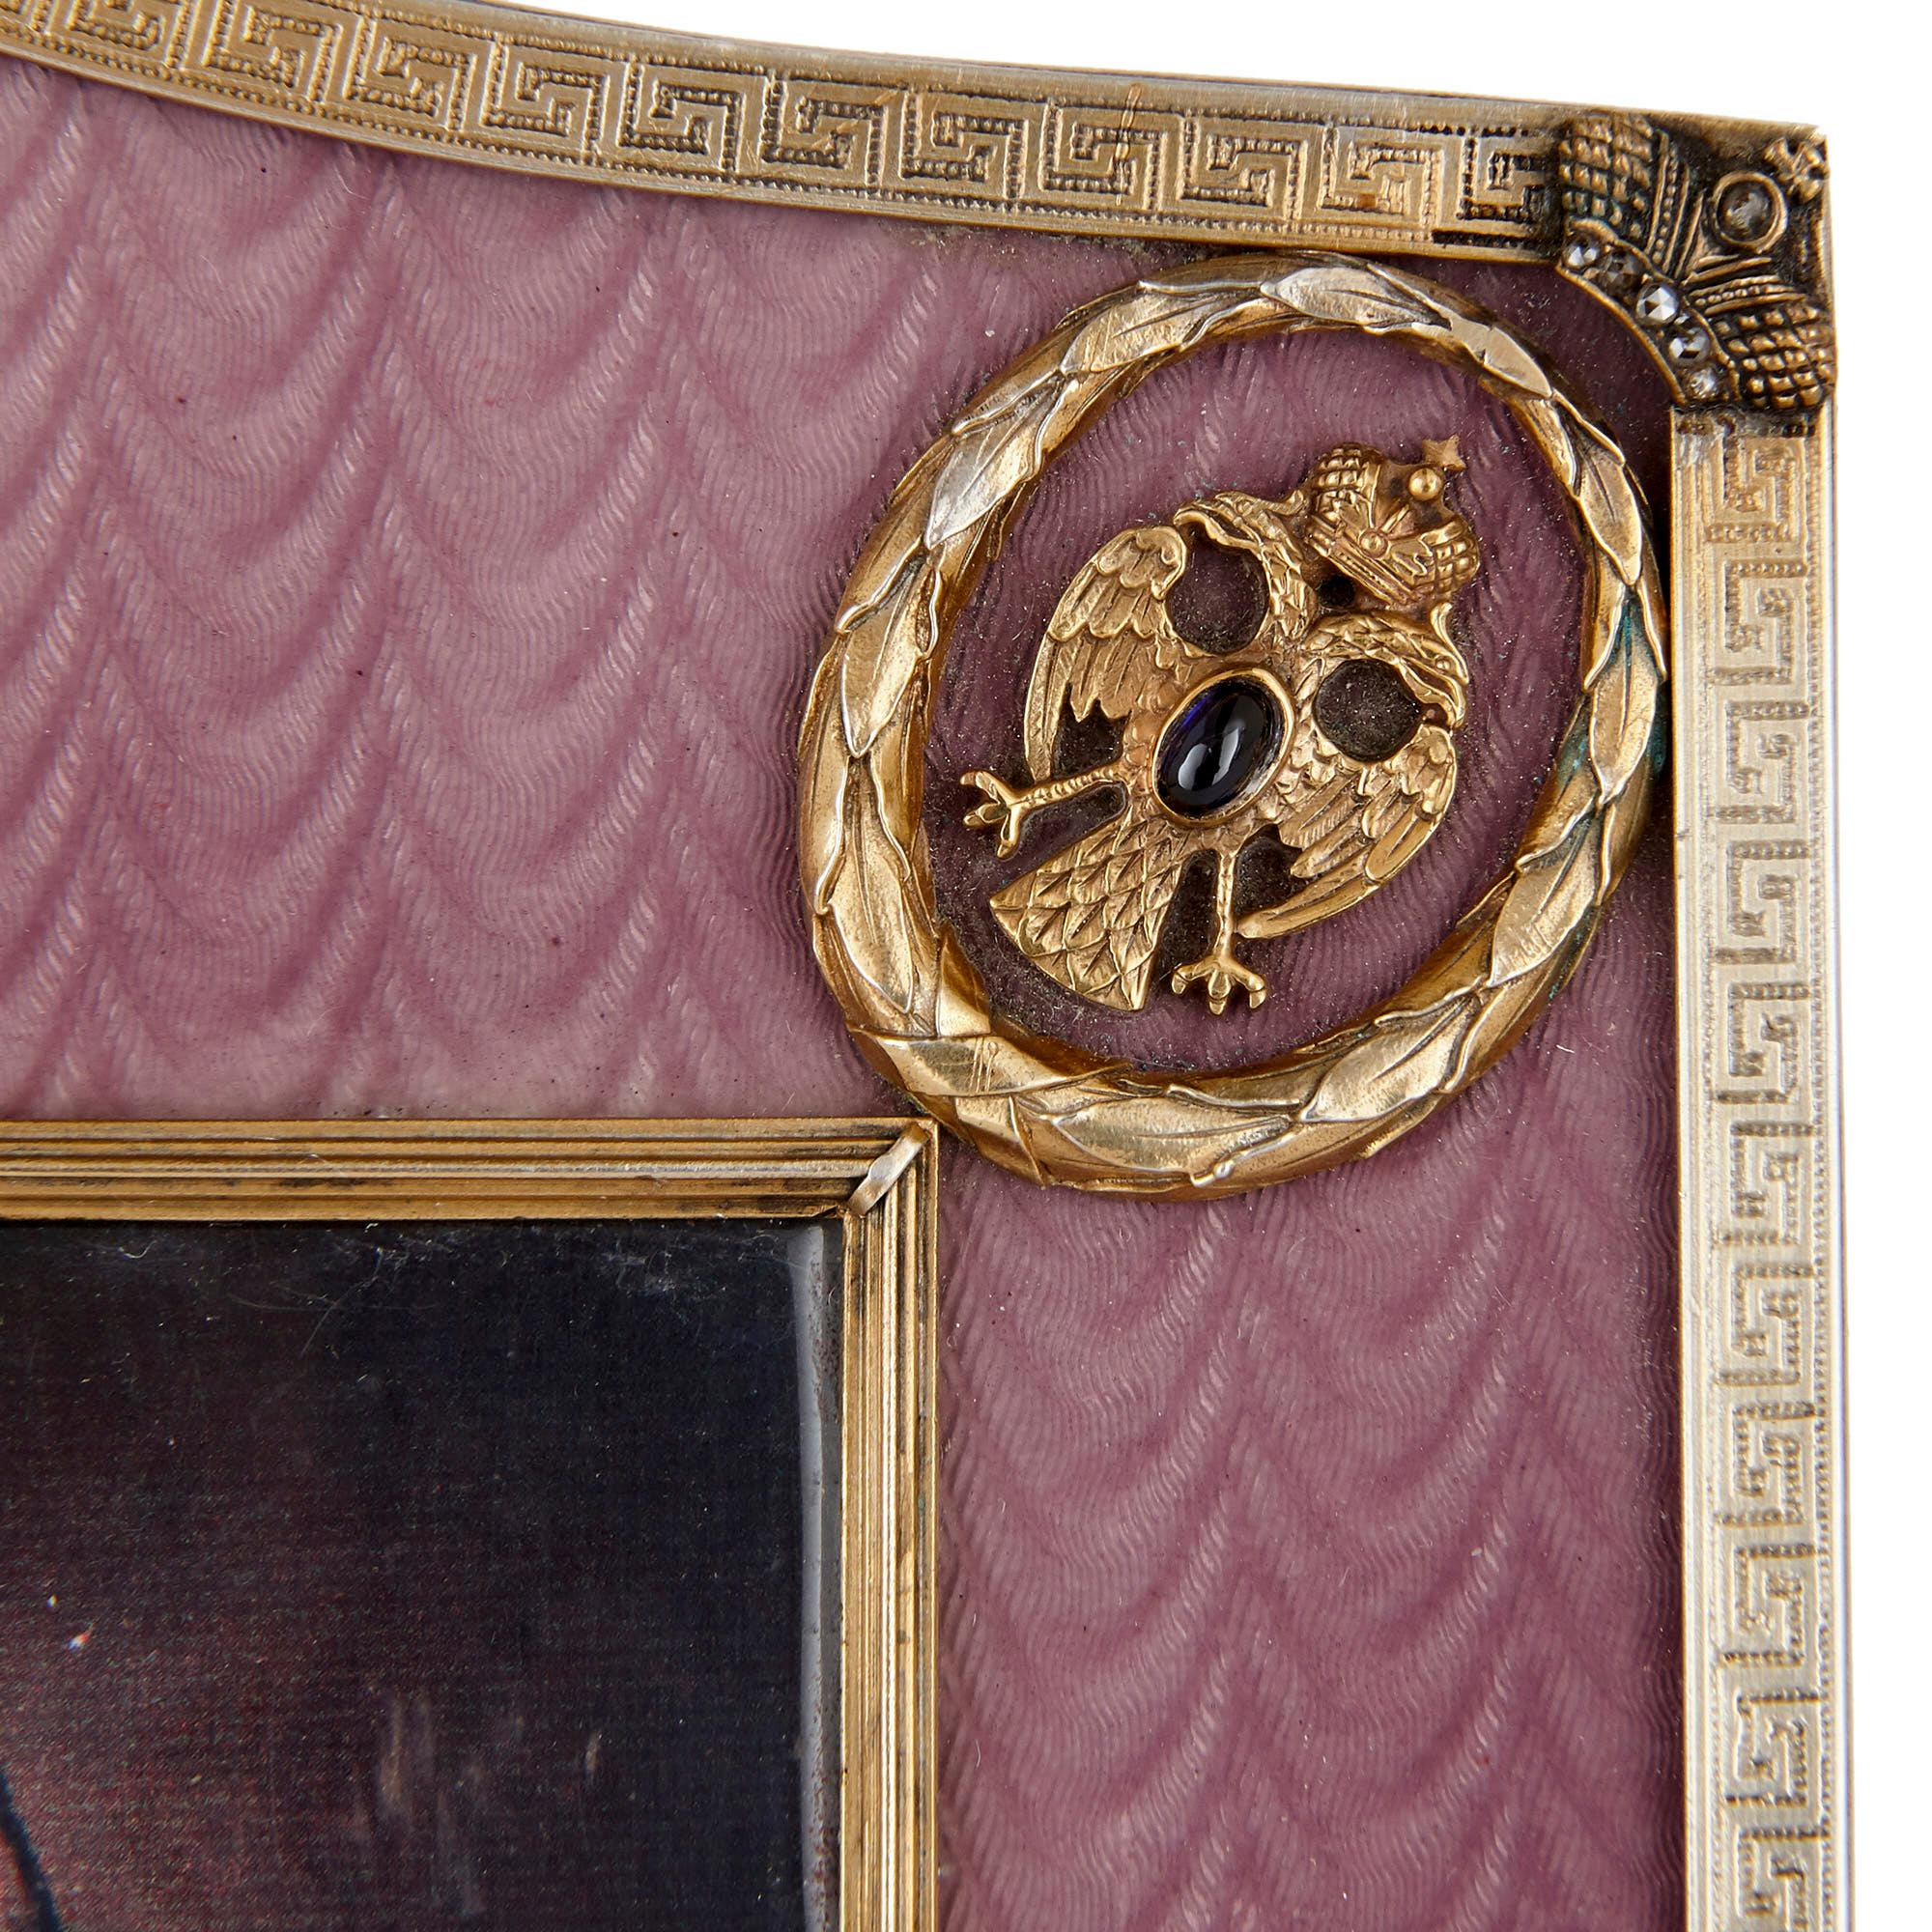 French Gold, Precious Stone, and Enamel Frame in the Manner of Fabergé